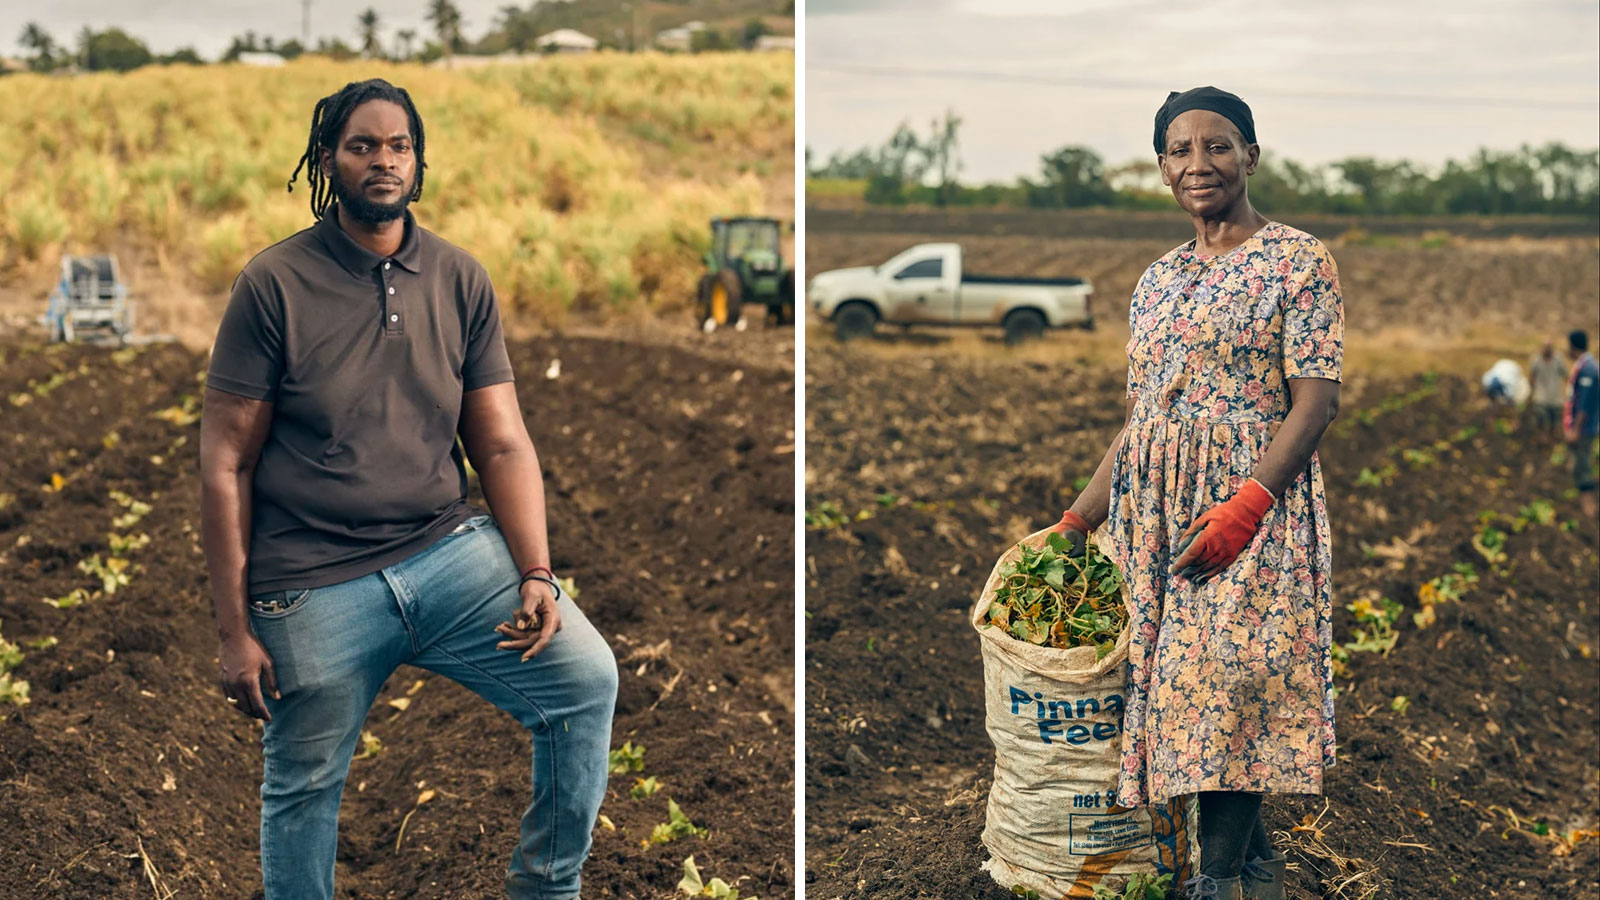 LEFT: Despite a transition to a service economy in Barbados, agricultural products still play a significant role. Kyle Blackmen, 30, manages workers near Drax Hall. RIGHT: Farm workers plant sweet potatoes on Edgecumbe Plantation, near Drax Hall. Austeria Bartlett Johnson, 62, has worked most of her life in the fields. 